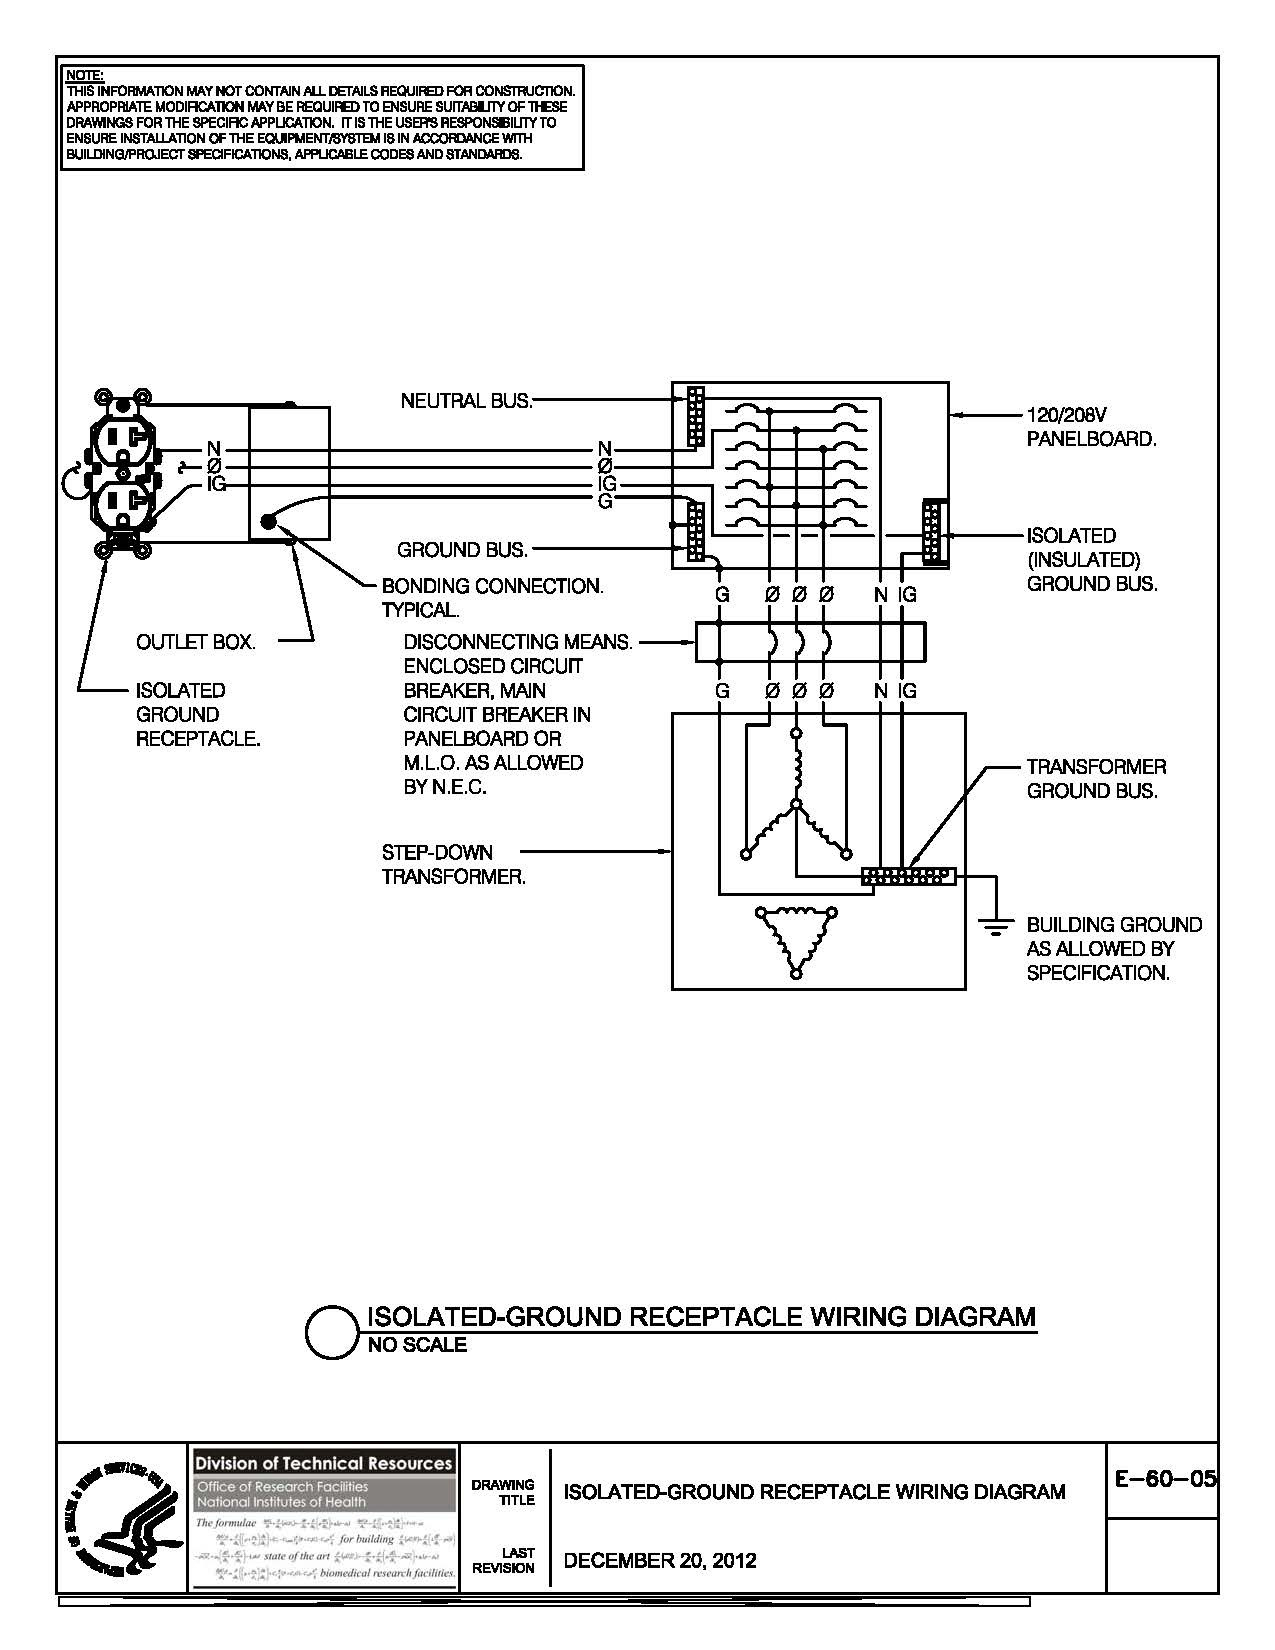 Invisible Fence Wiring Diagram | Wiring Diagram - Invisible Fence Wiring Diagram